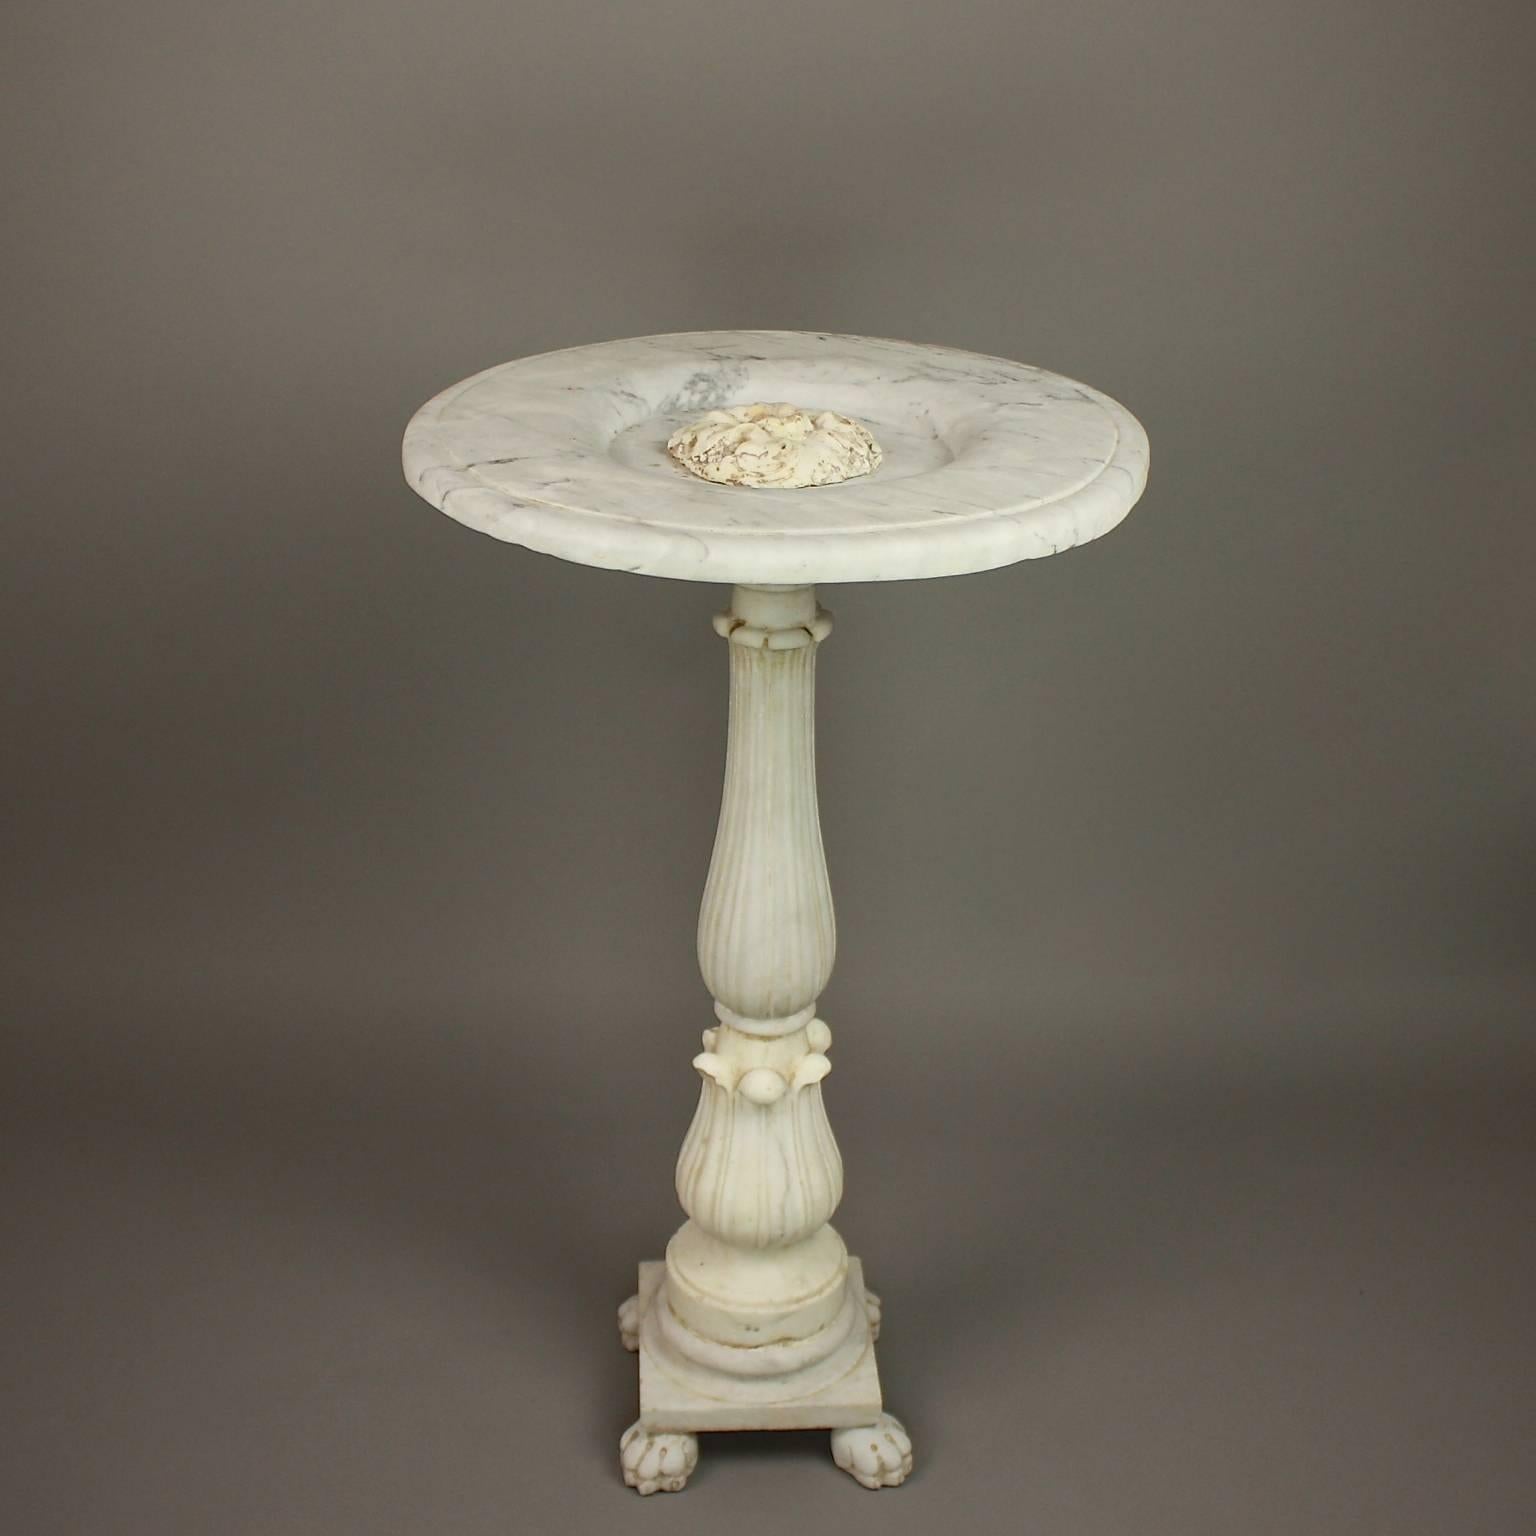 Late 18th century marble fountain carved in Carrara marble and originally the center piece of a larger basin. A circular flat top with a central vine ornament adorns the waterspout. The water would pour over the rim softening the edges of this hard